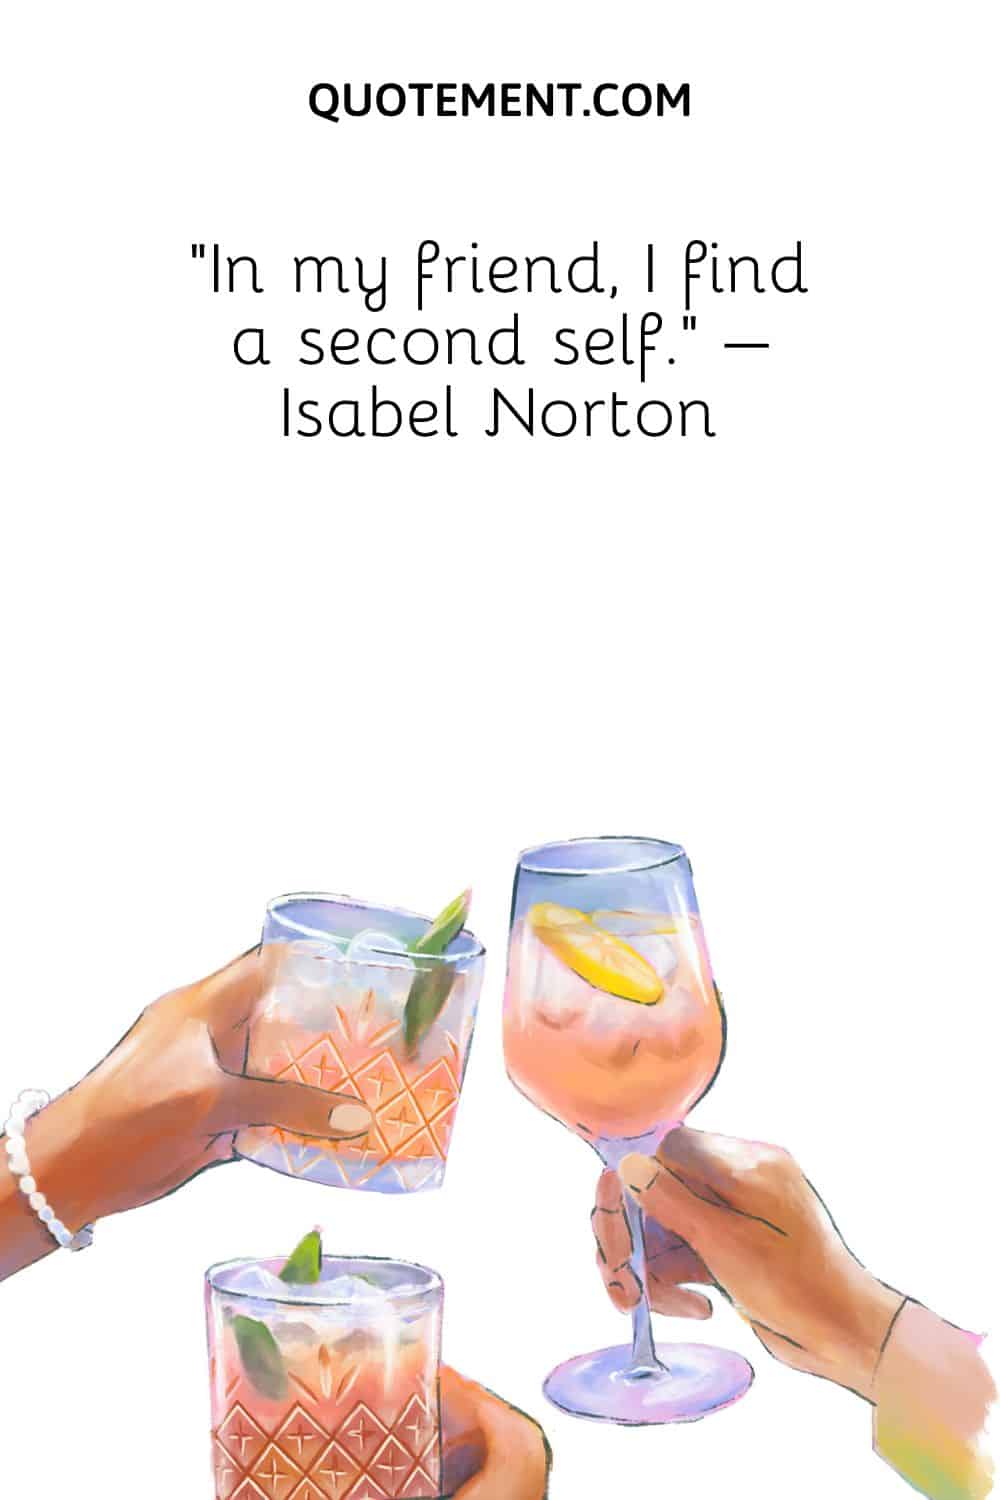 “In my friend, I find a second self. – Isabel Norton